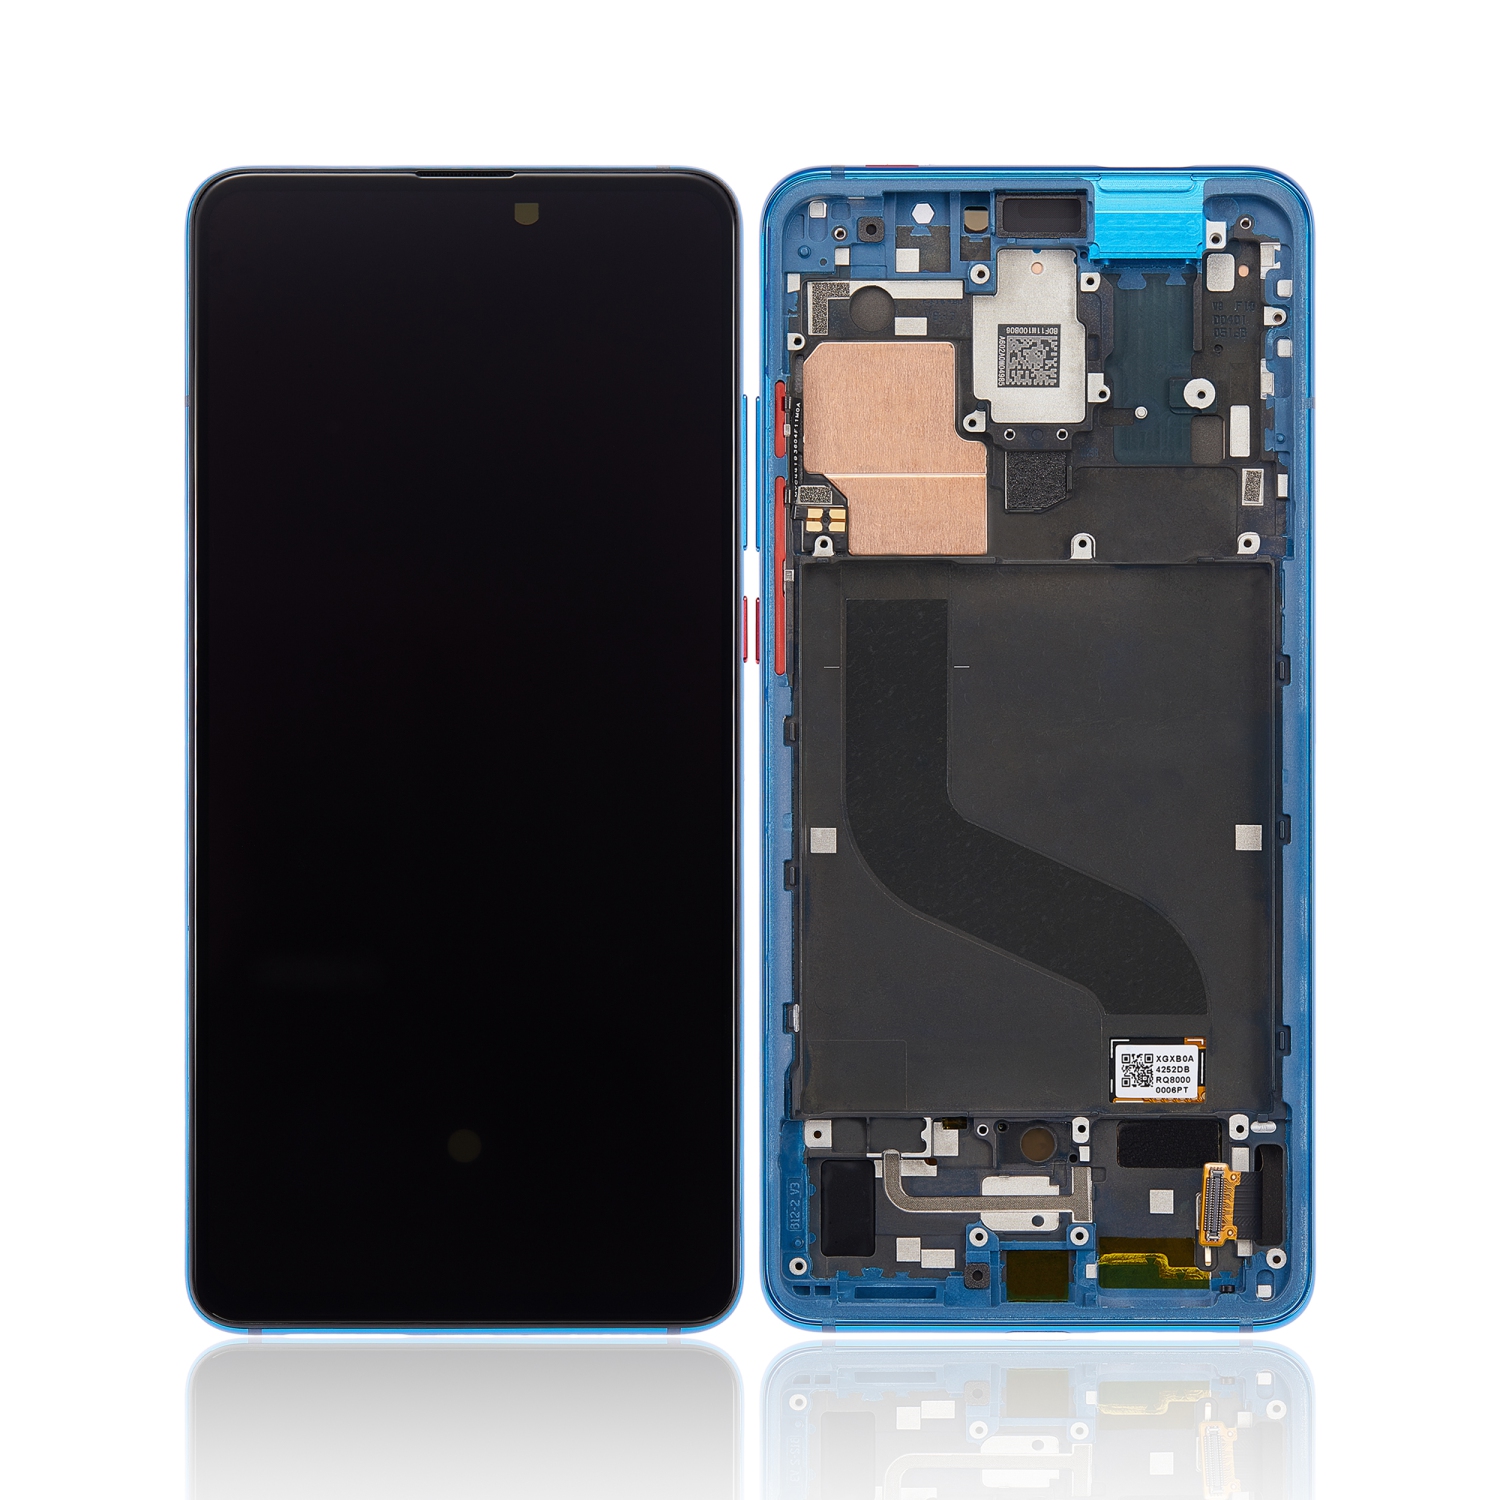 Refurbished (Excellent) - Replacement OLED Assembly With Frame Compatible For Xiaomi Mi 9T / 9T Pro / K20 / K20 Pro (Glacier Blue)